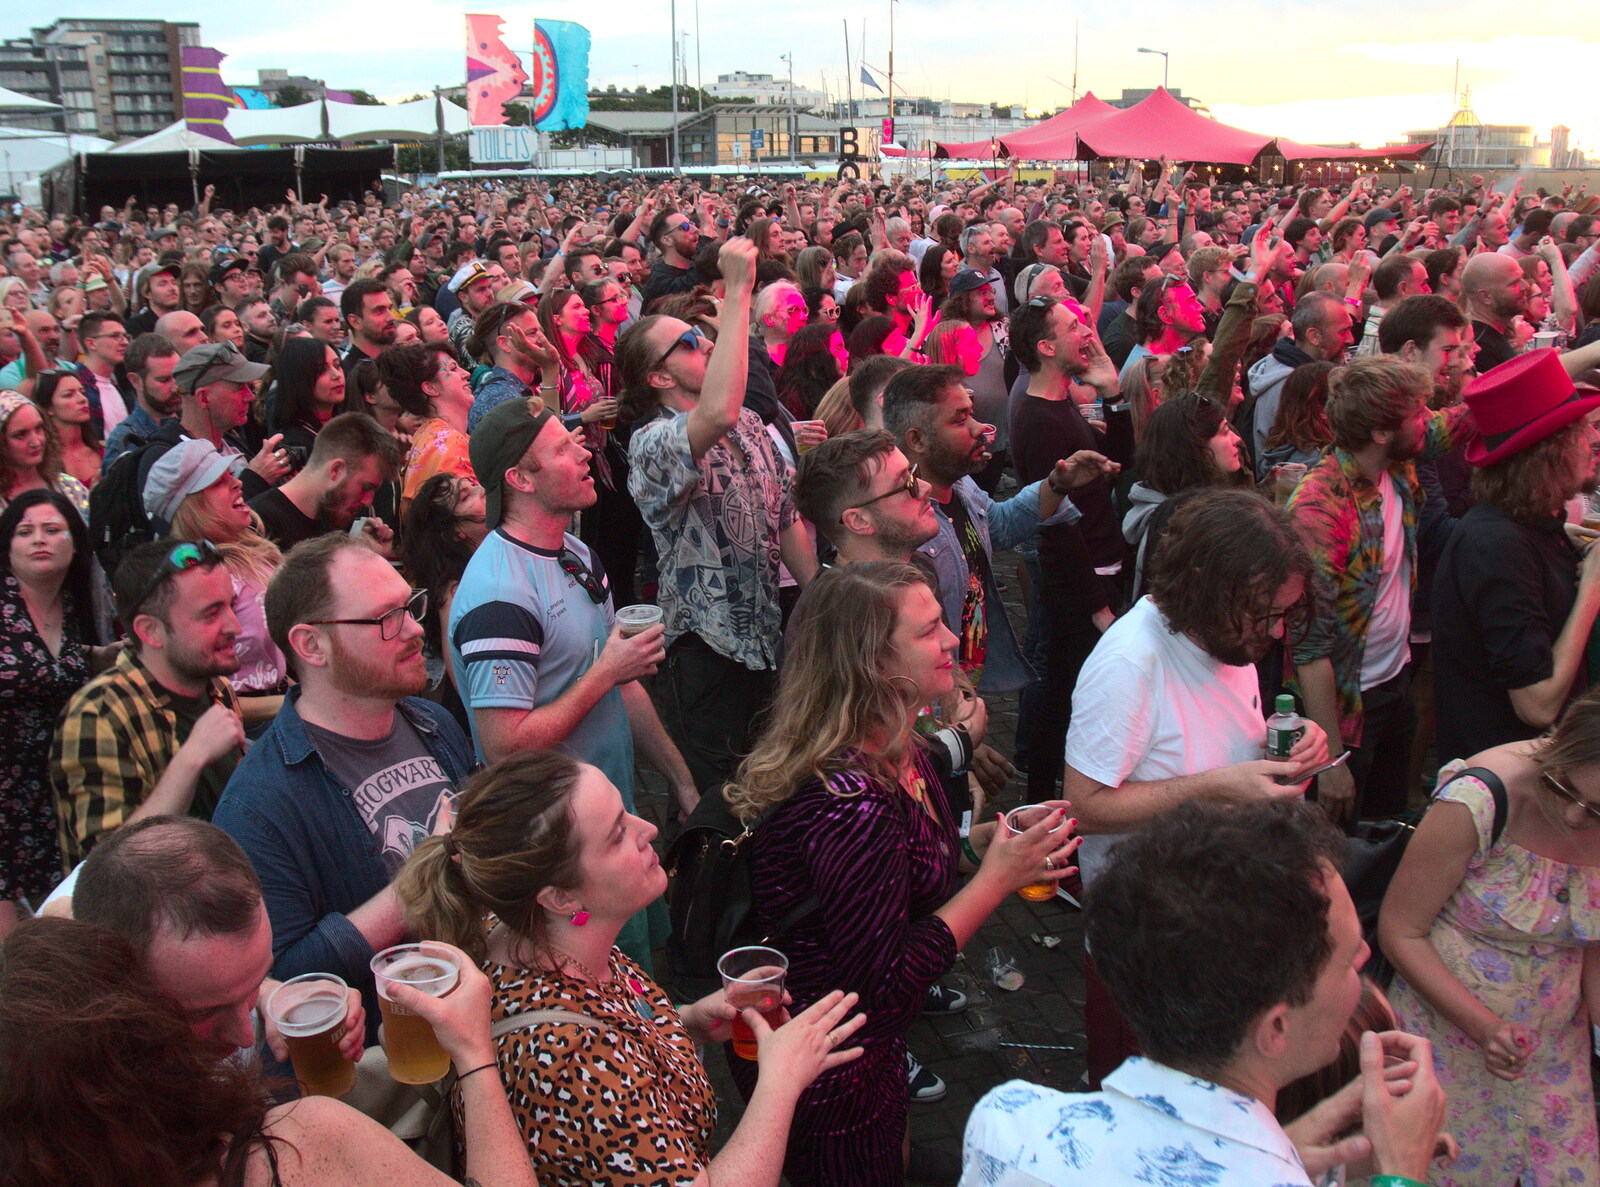 The crowd warms up for Kamasi Washington from Beatyard Festival, Dún Laoghaire, County Dublin, Ireland - 5th August 2018